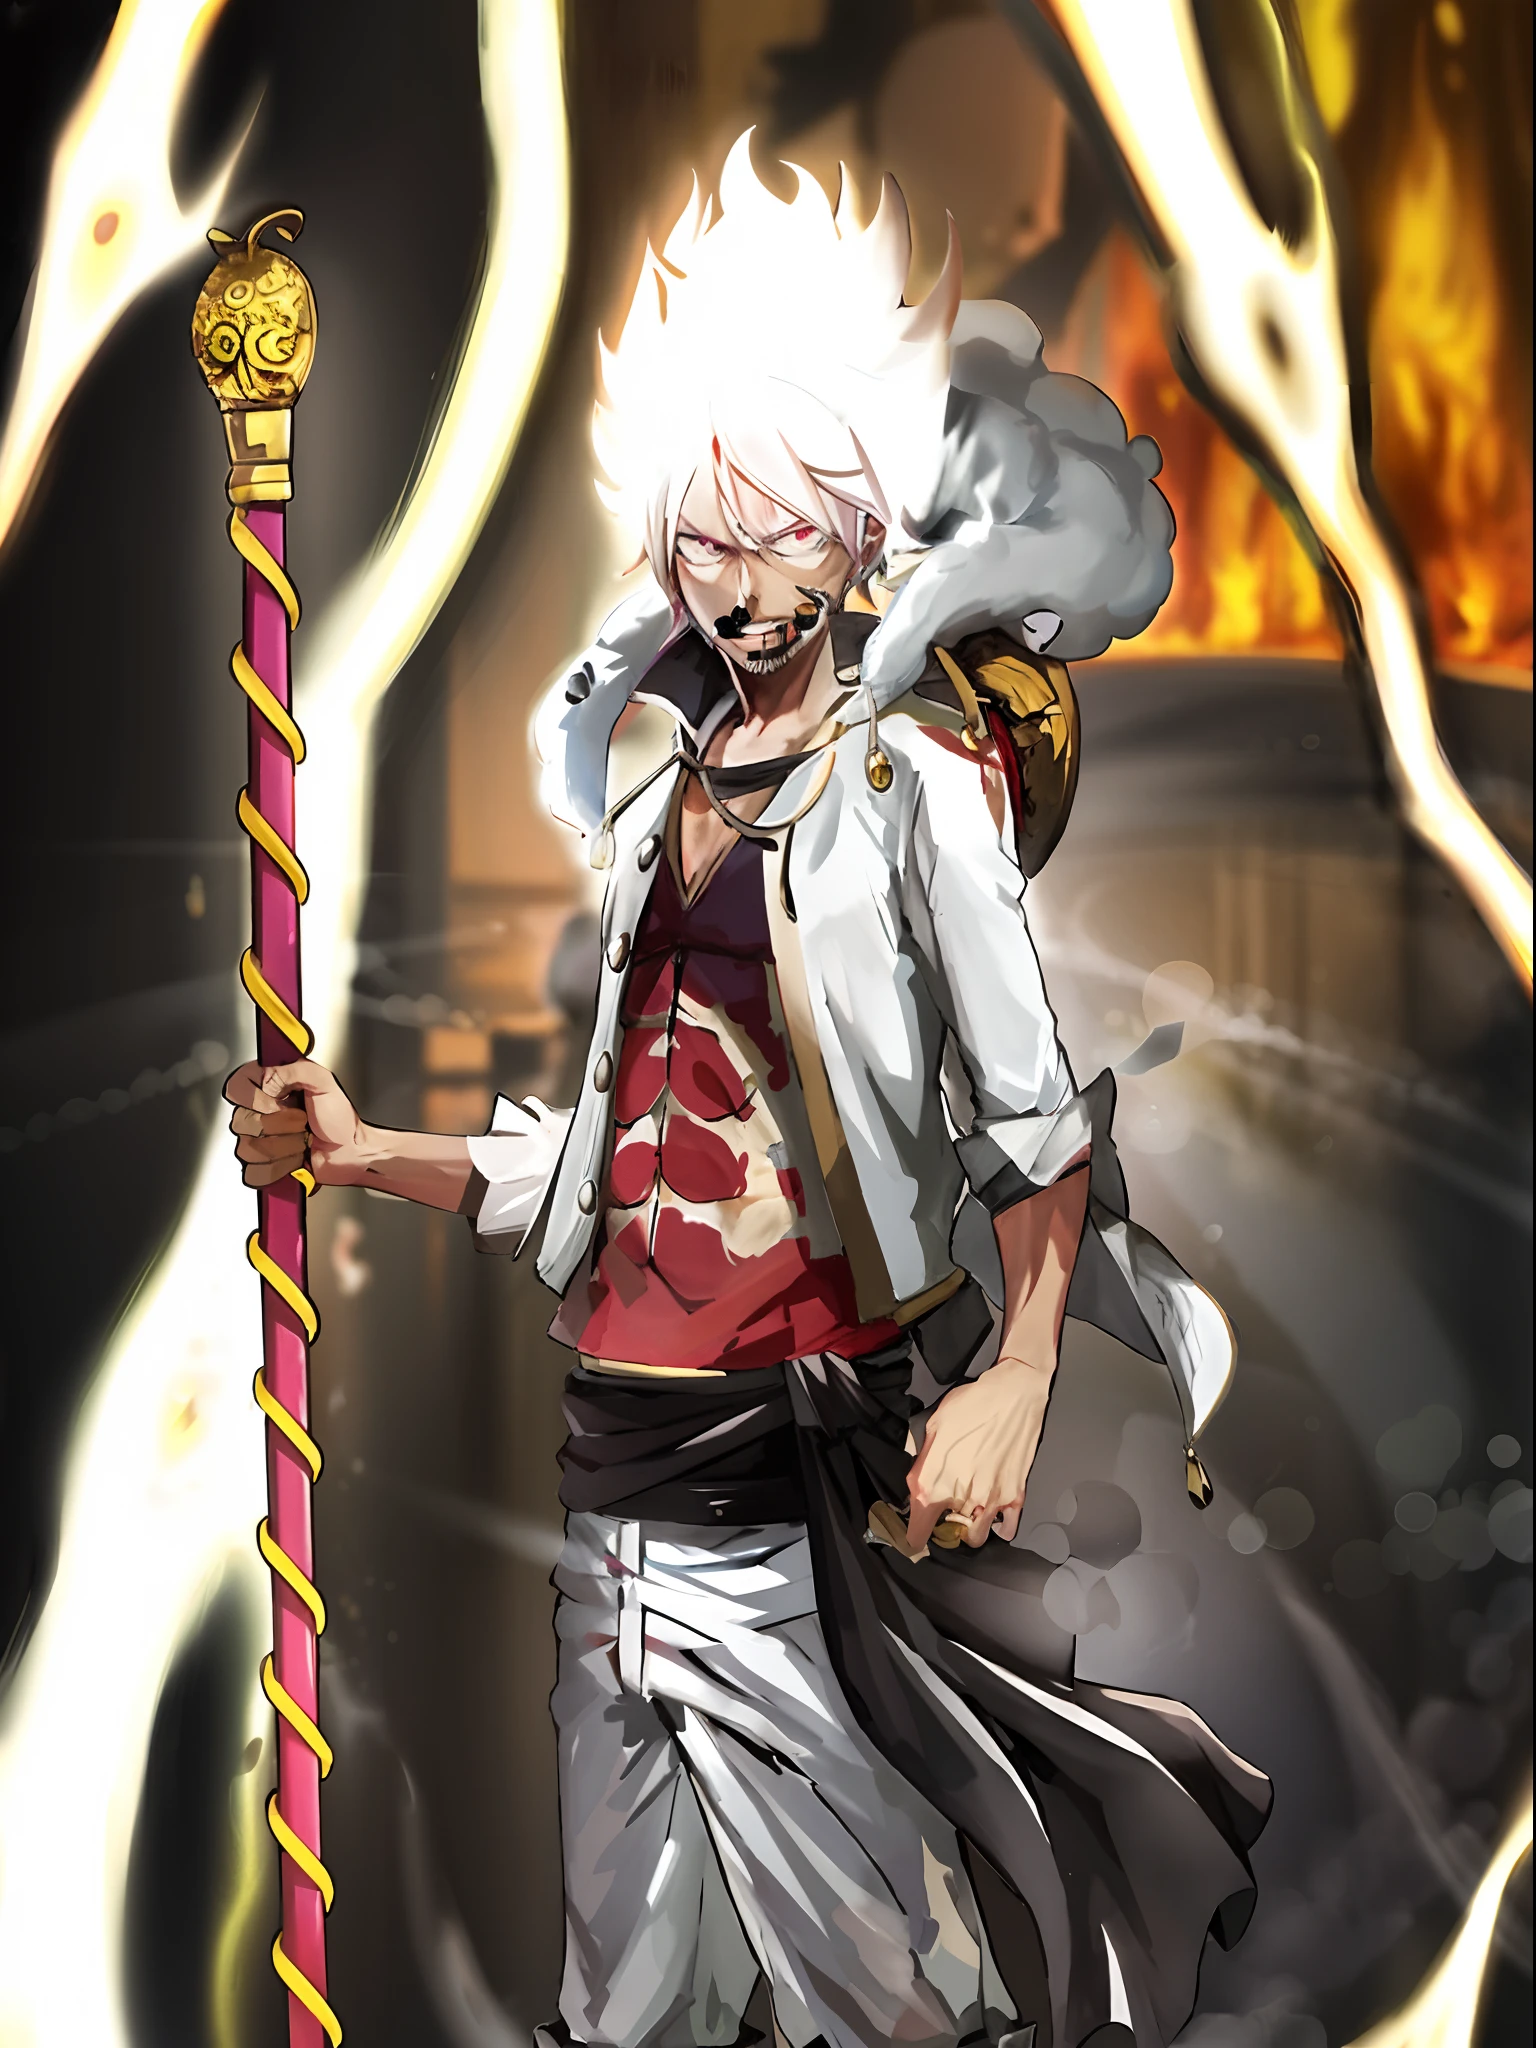 Anime character with white hair holding a sword in front of the fire, beautiful male god of death, legendary god holding spear, Fire!! full bodyesbian, a silver haired mad, white-haired god, from one piece, luffy gear 5, joker looks like naruto, offcial art, joker as naruto, one piece art style, the god of chaos, nagito komaeda